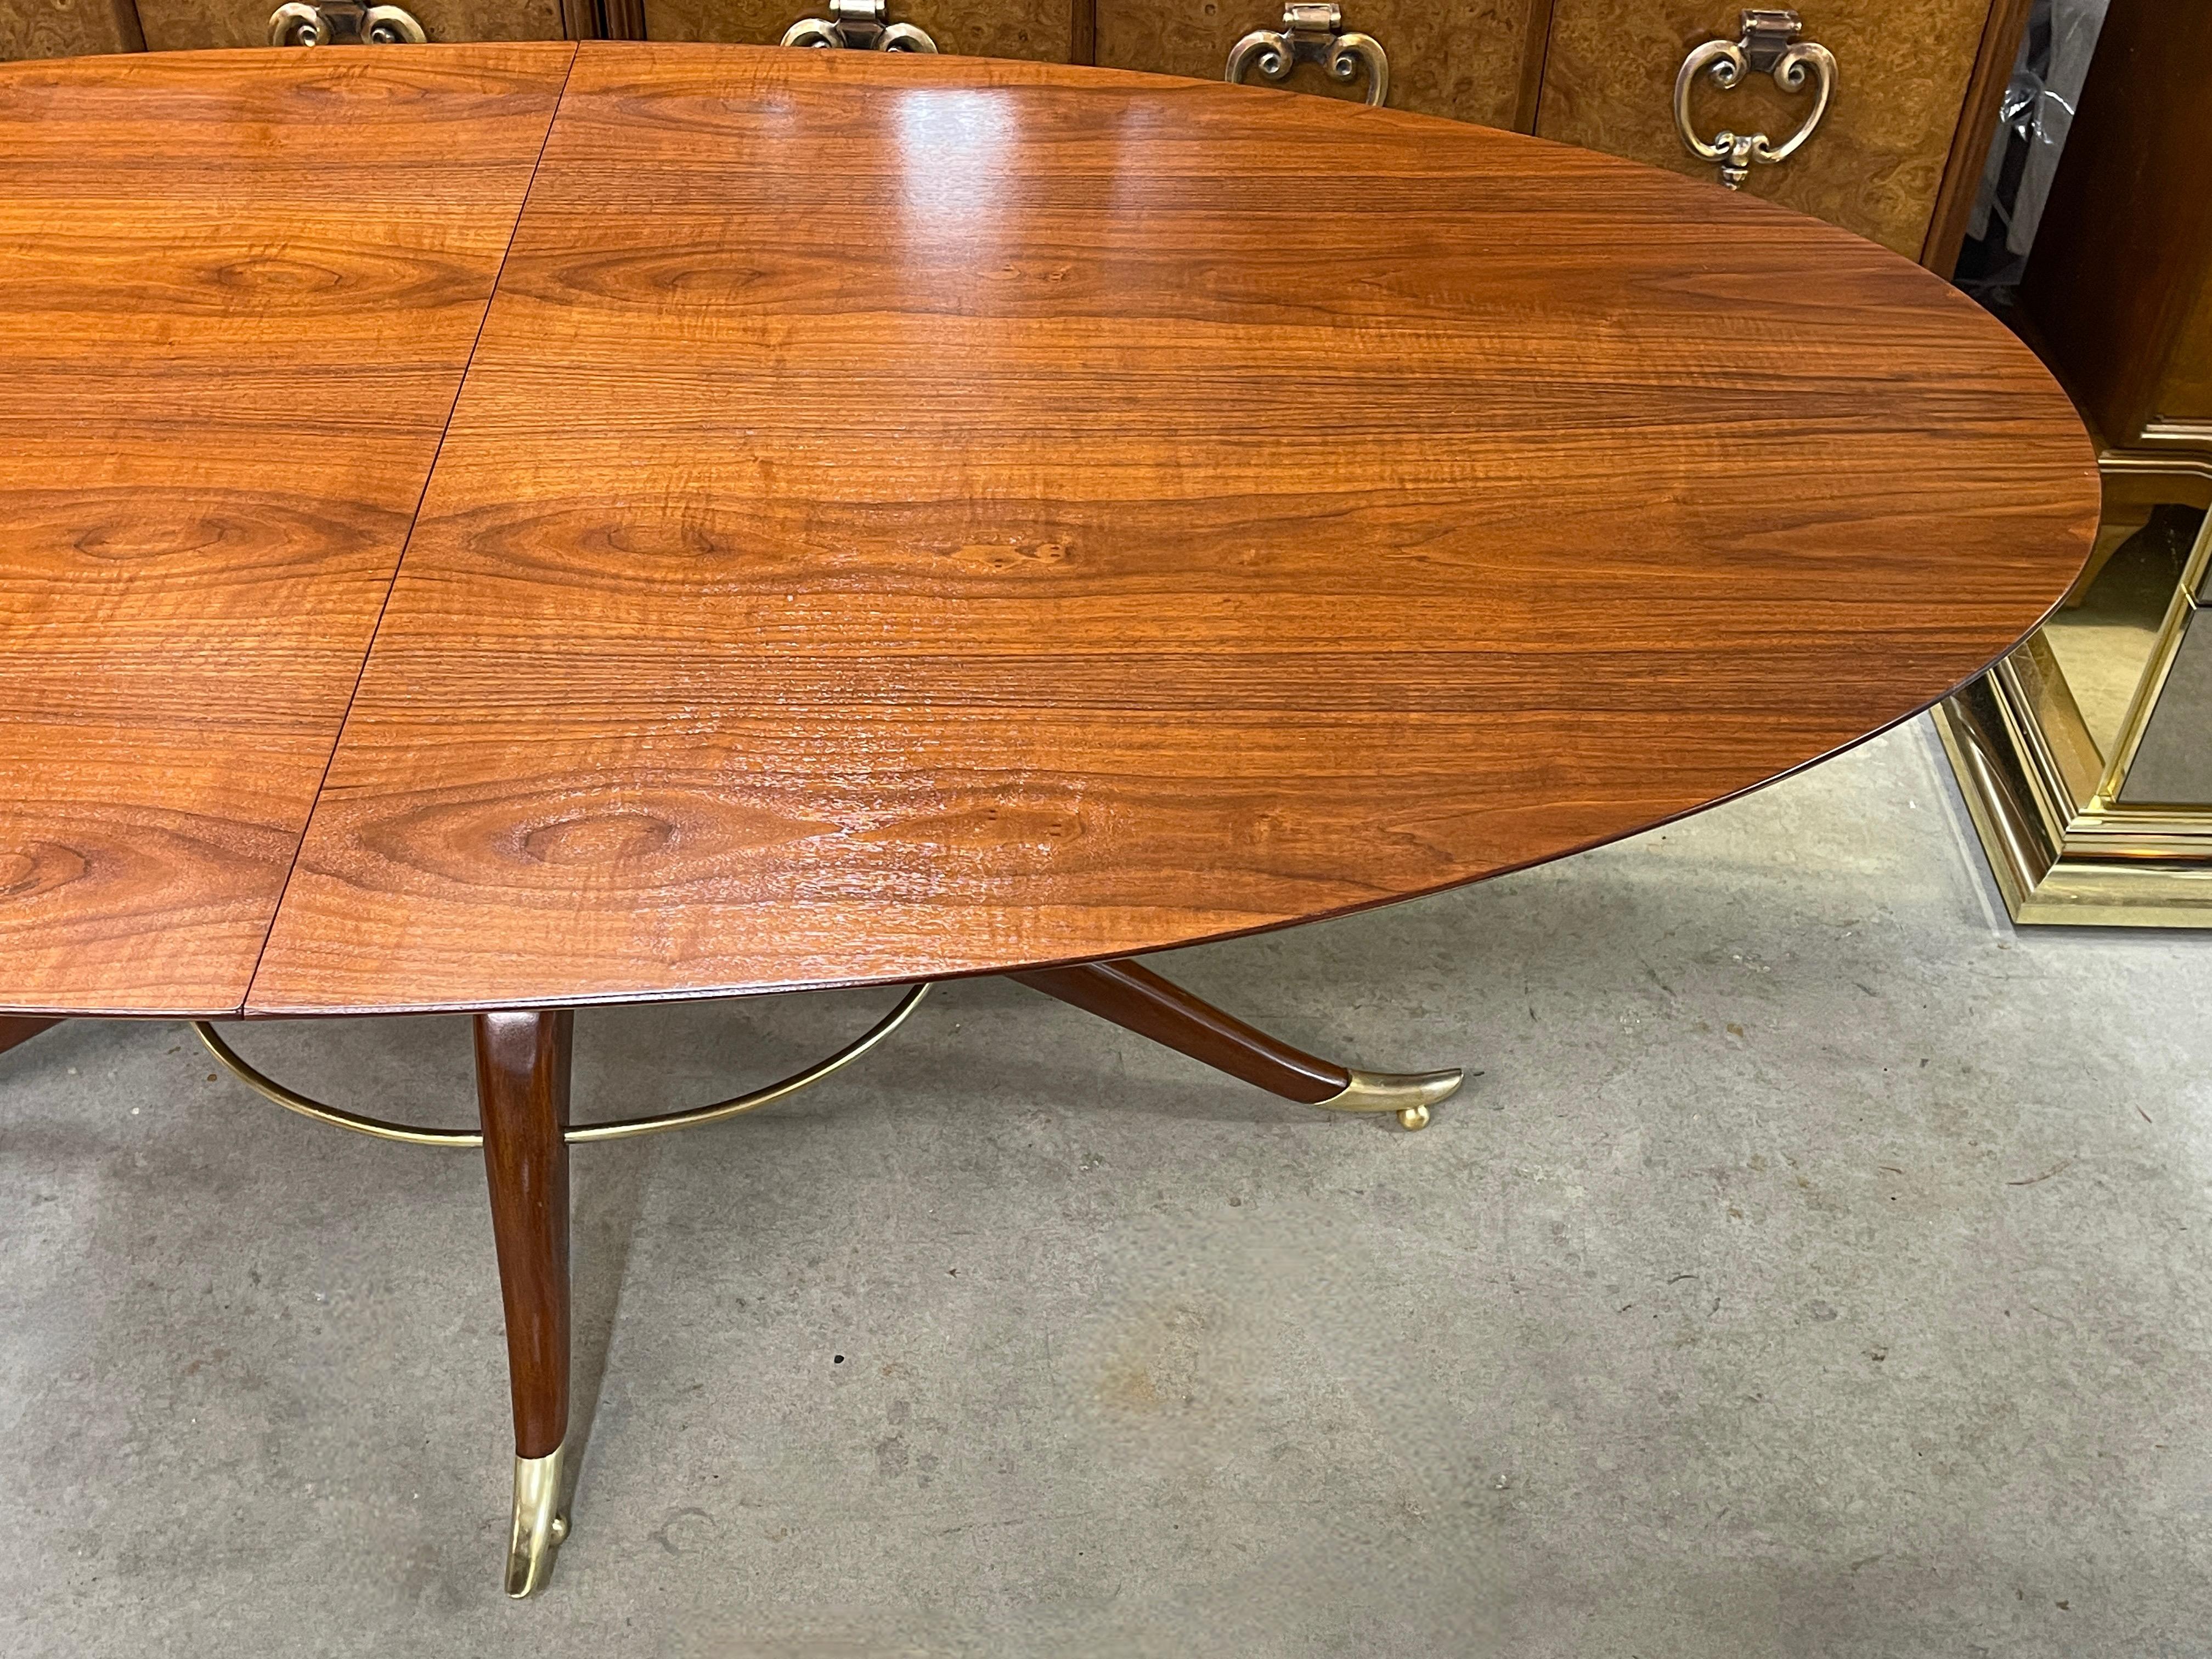 Hand-Crafted Elliptical Oval Dining Table by Adolfo Genovese for F&G Handmade Furniture